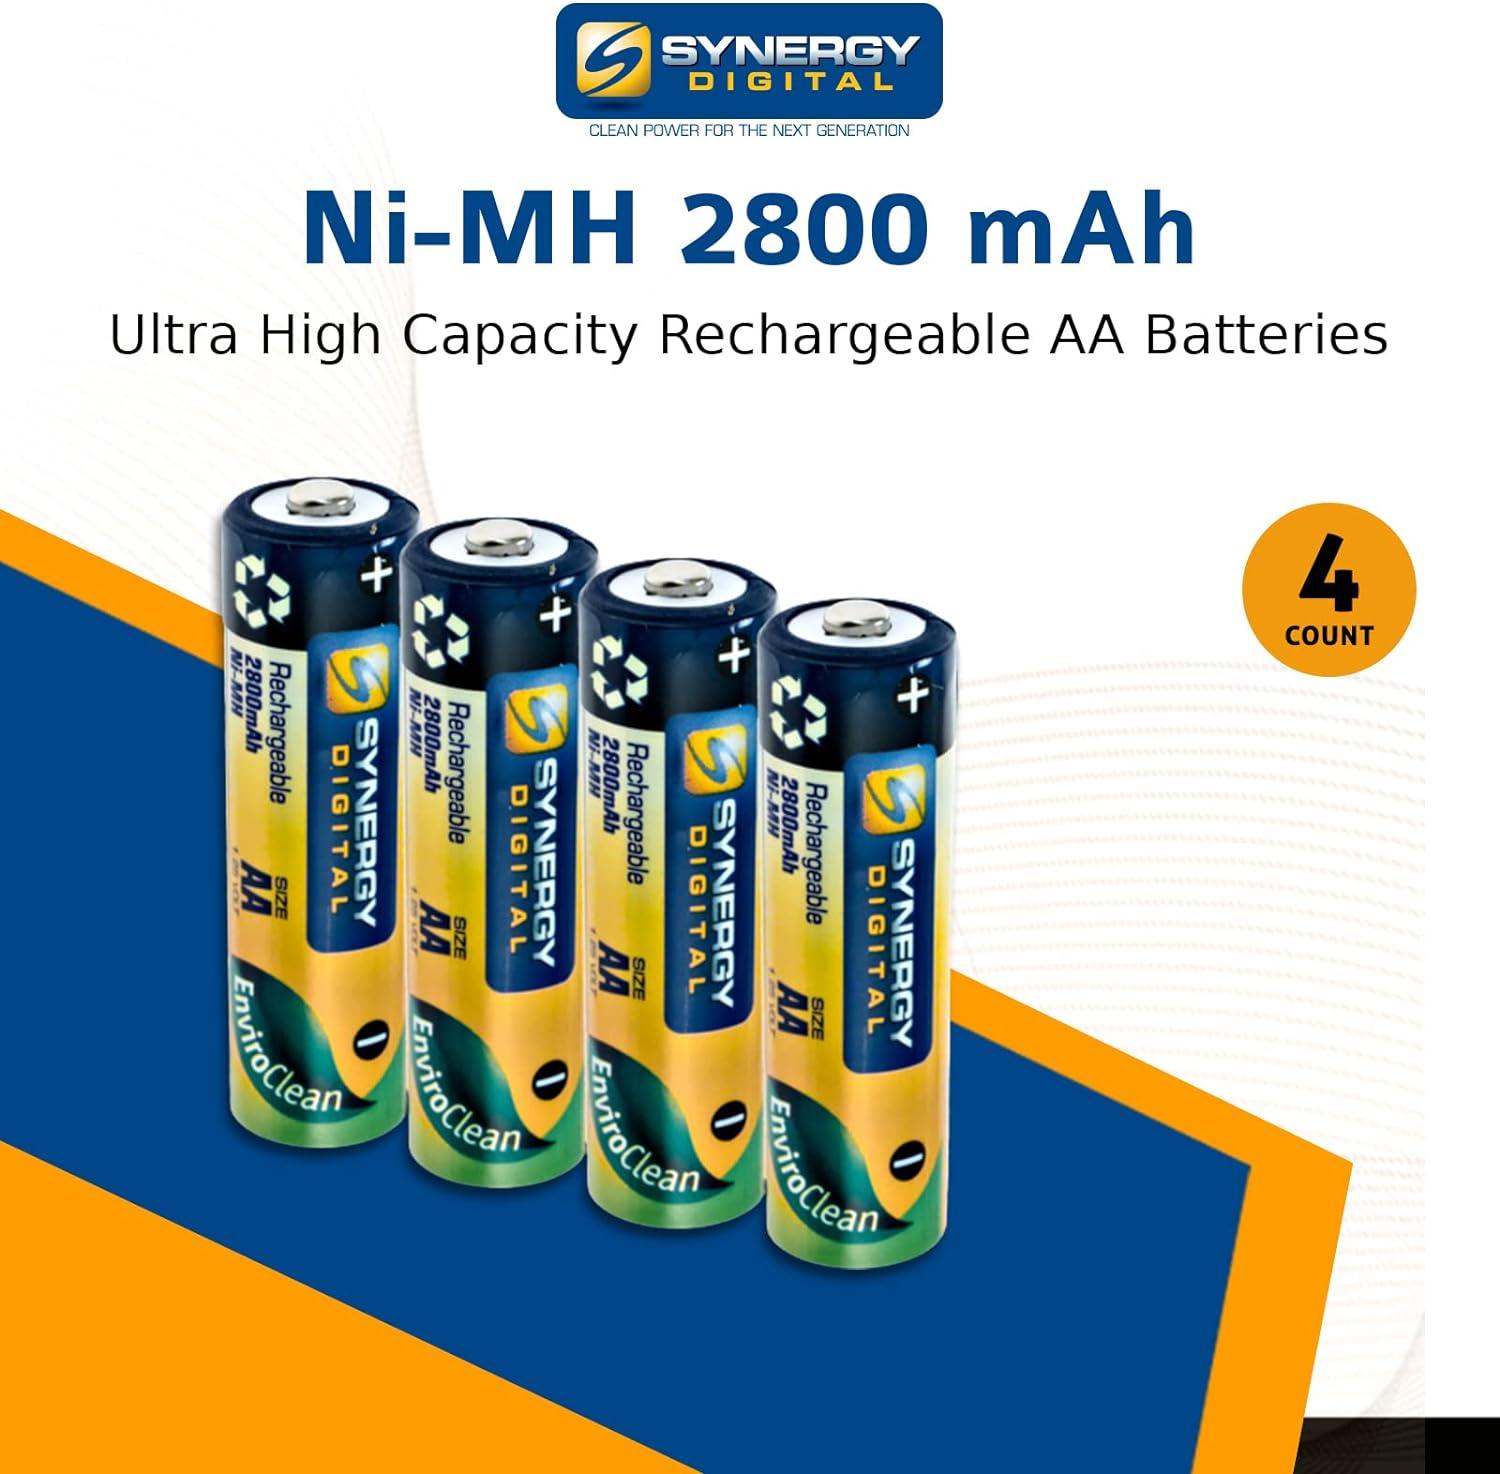 Which AA Rechargeable Battery Gives You the Best Bang for Your Buck?